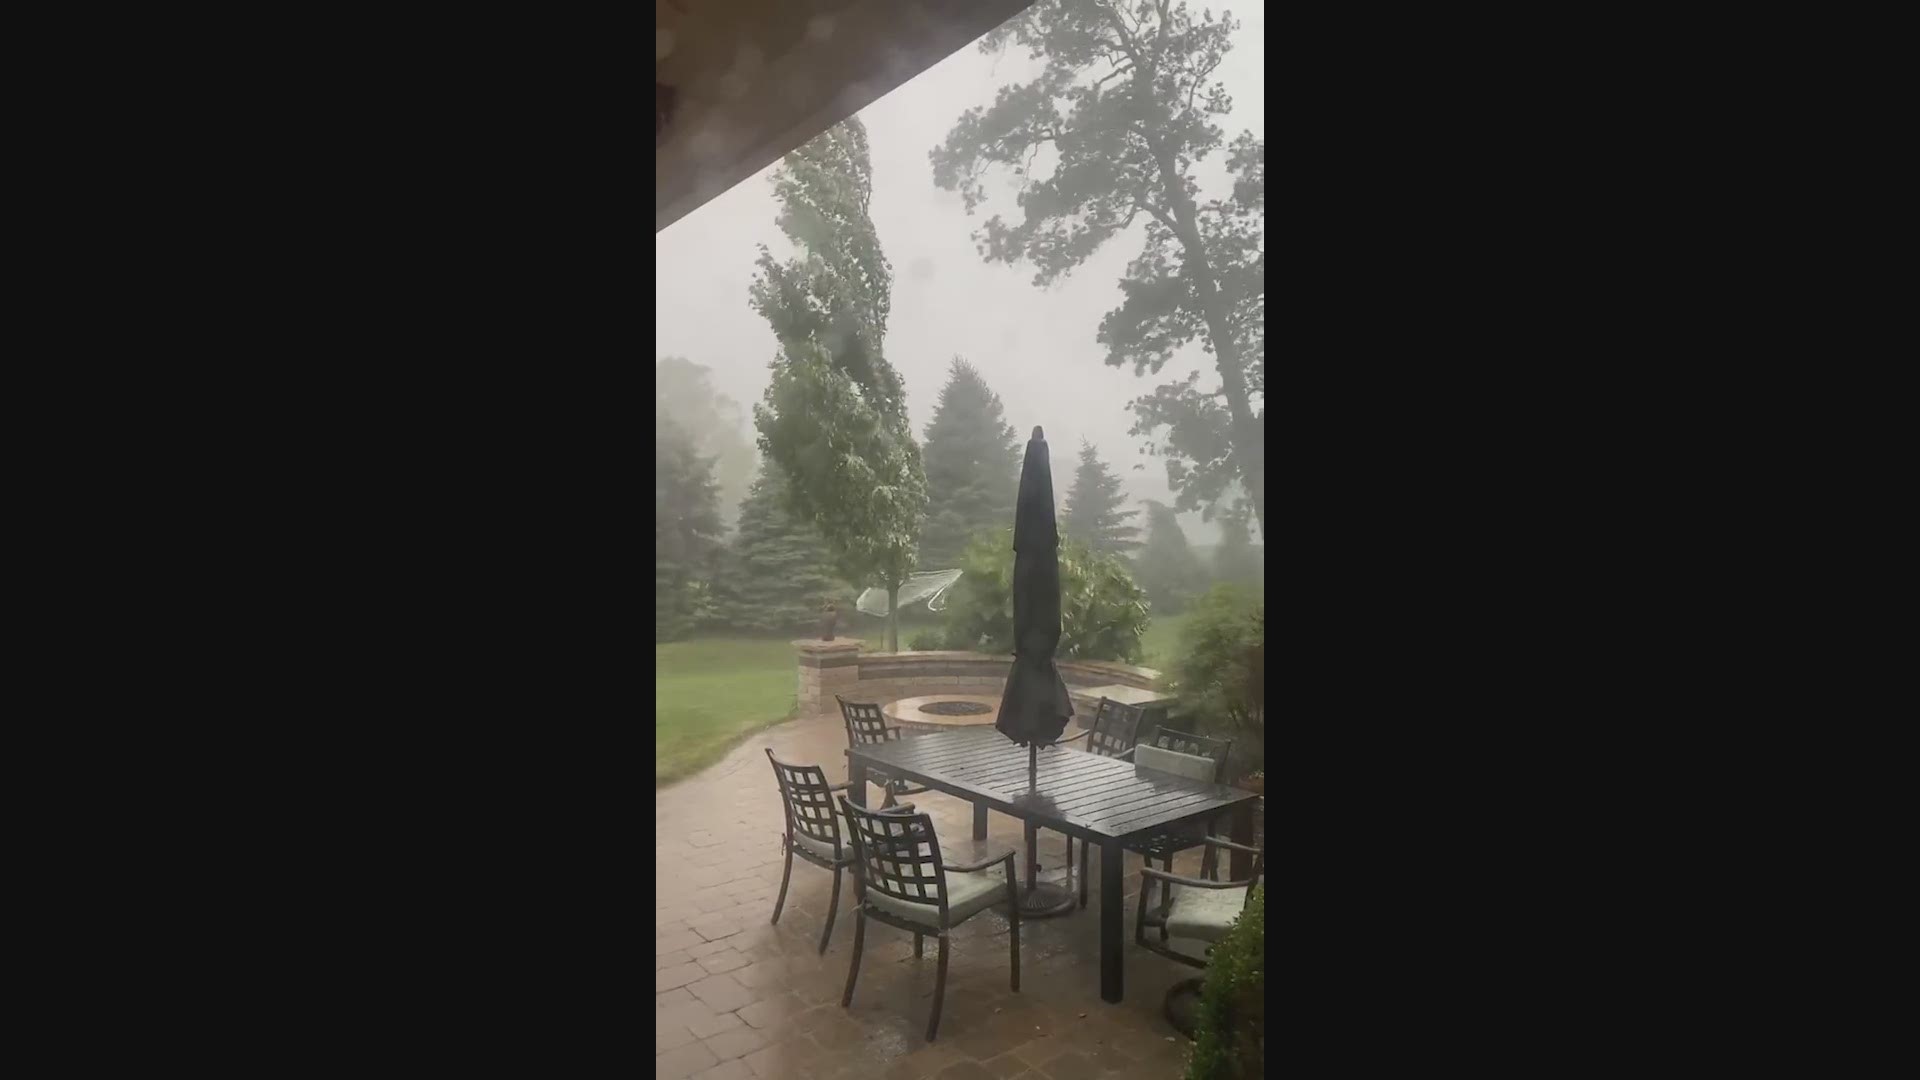 A large tree coming down in Fishers, Indiana during storms on June 18, 2021. Video courtesy: Emily D